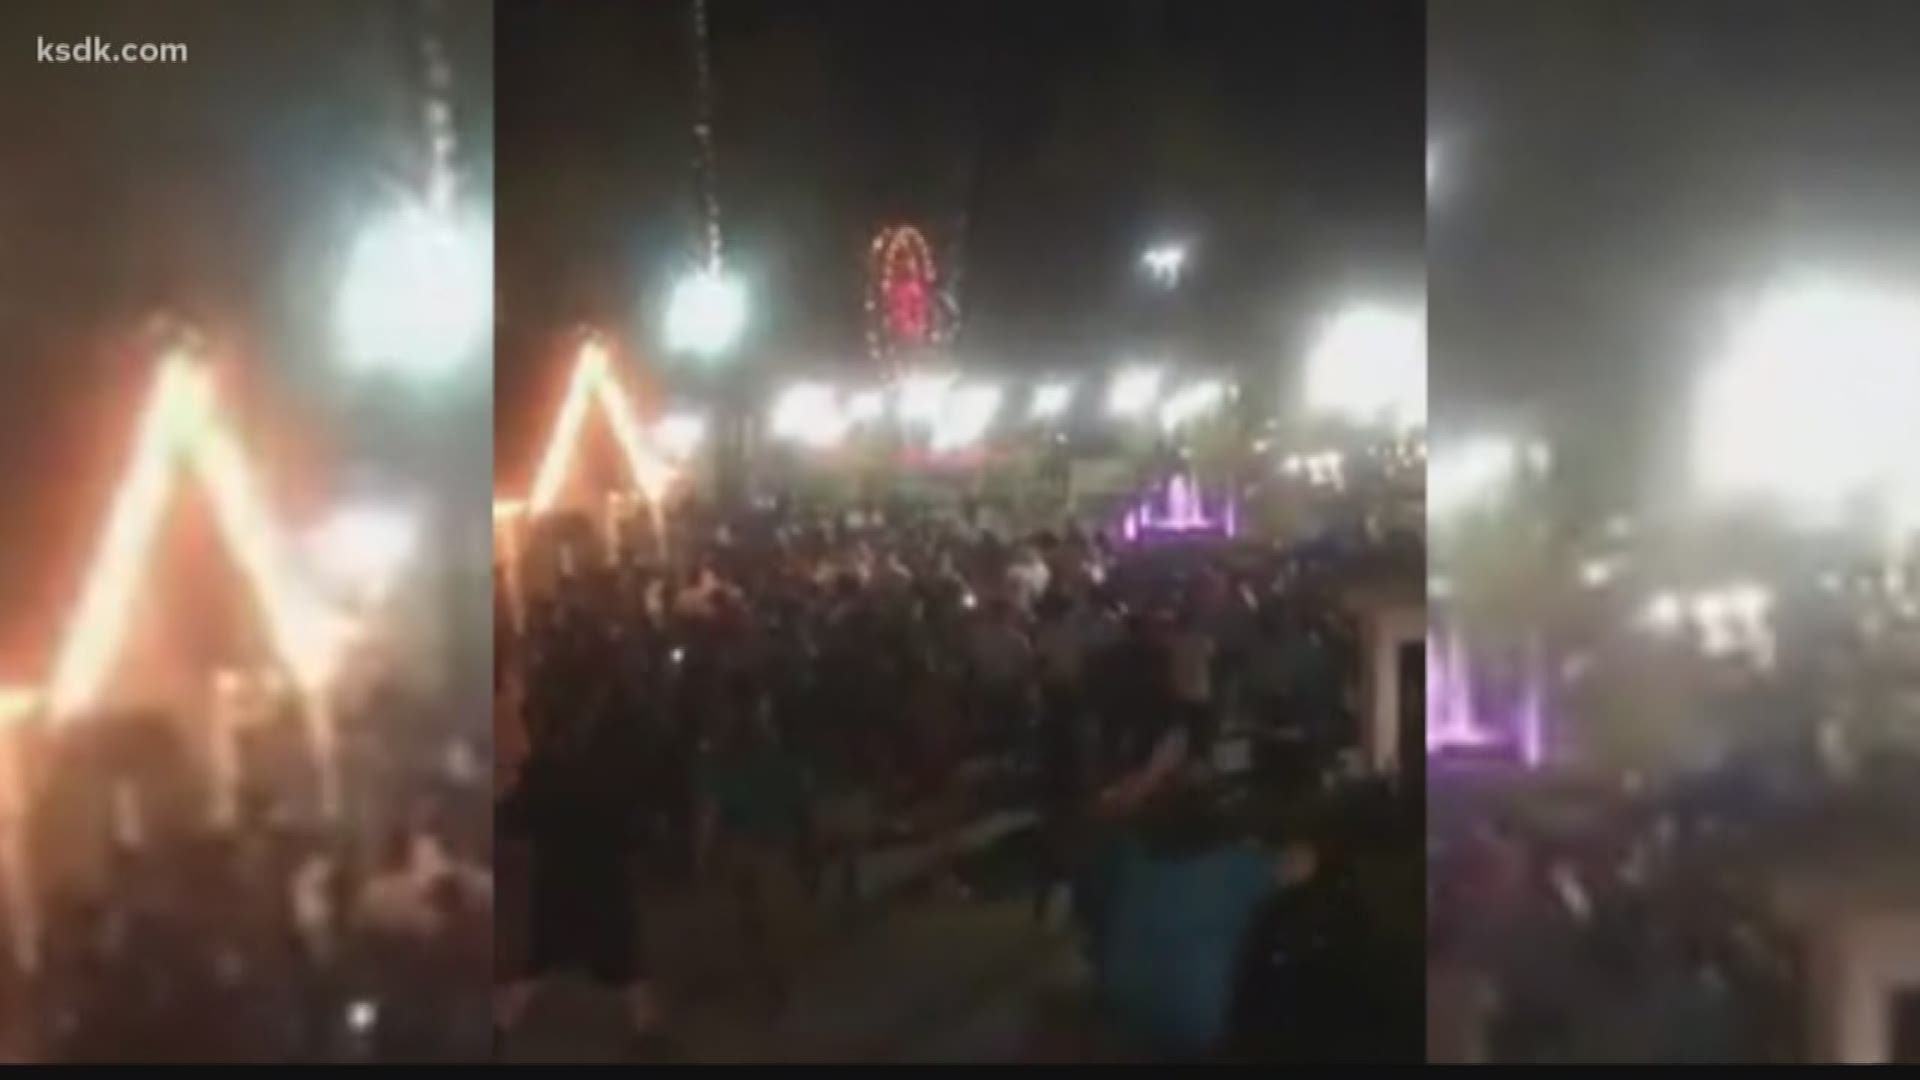 Kansas City police say several law enforcement agencies were called to the park Saturday night